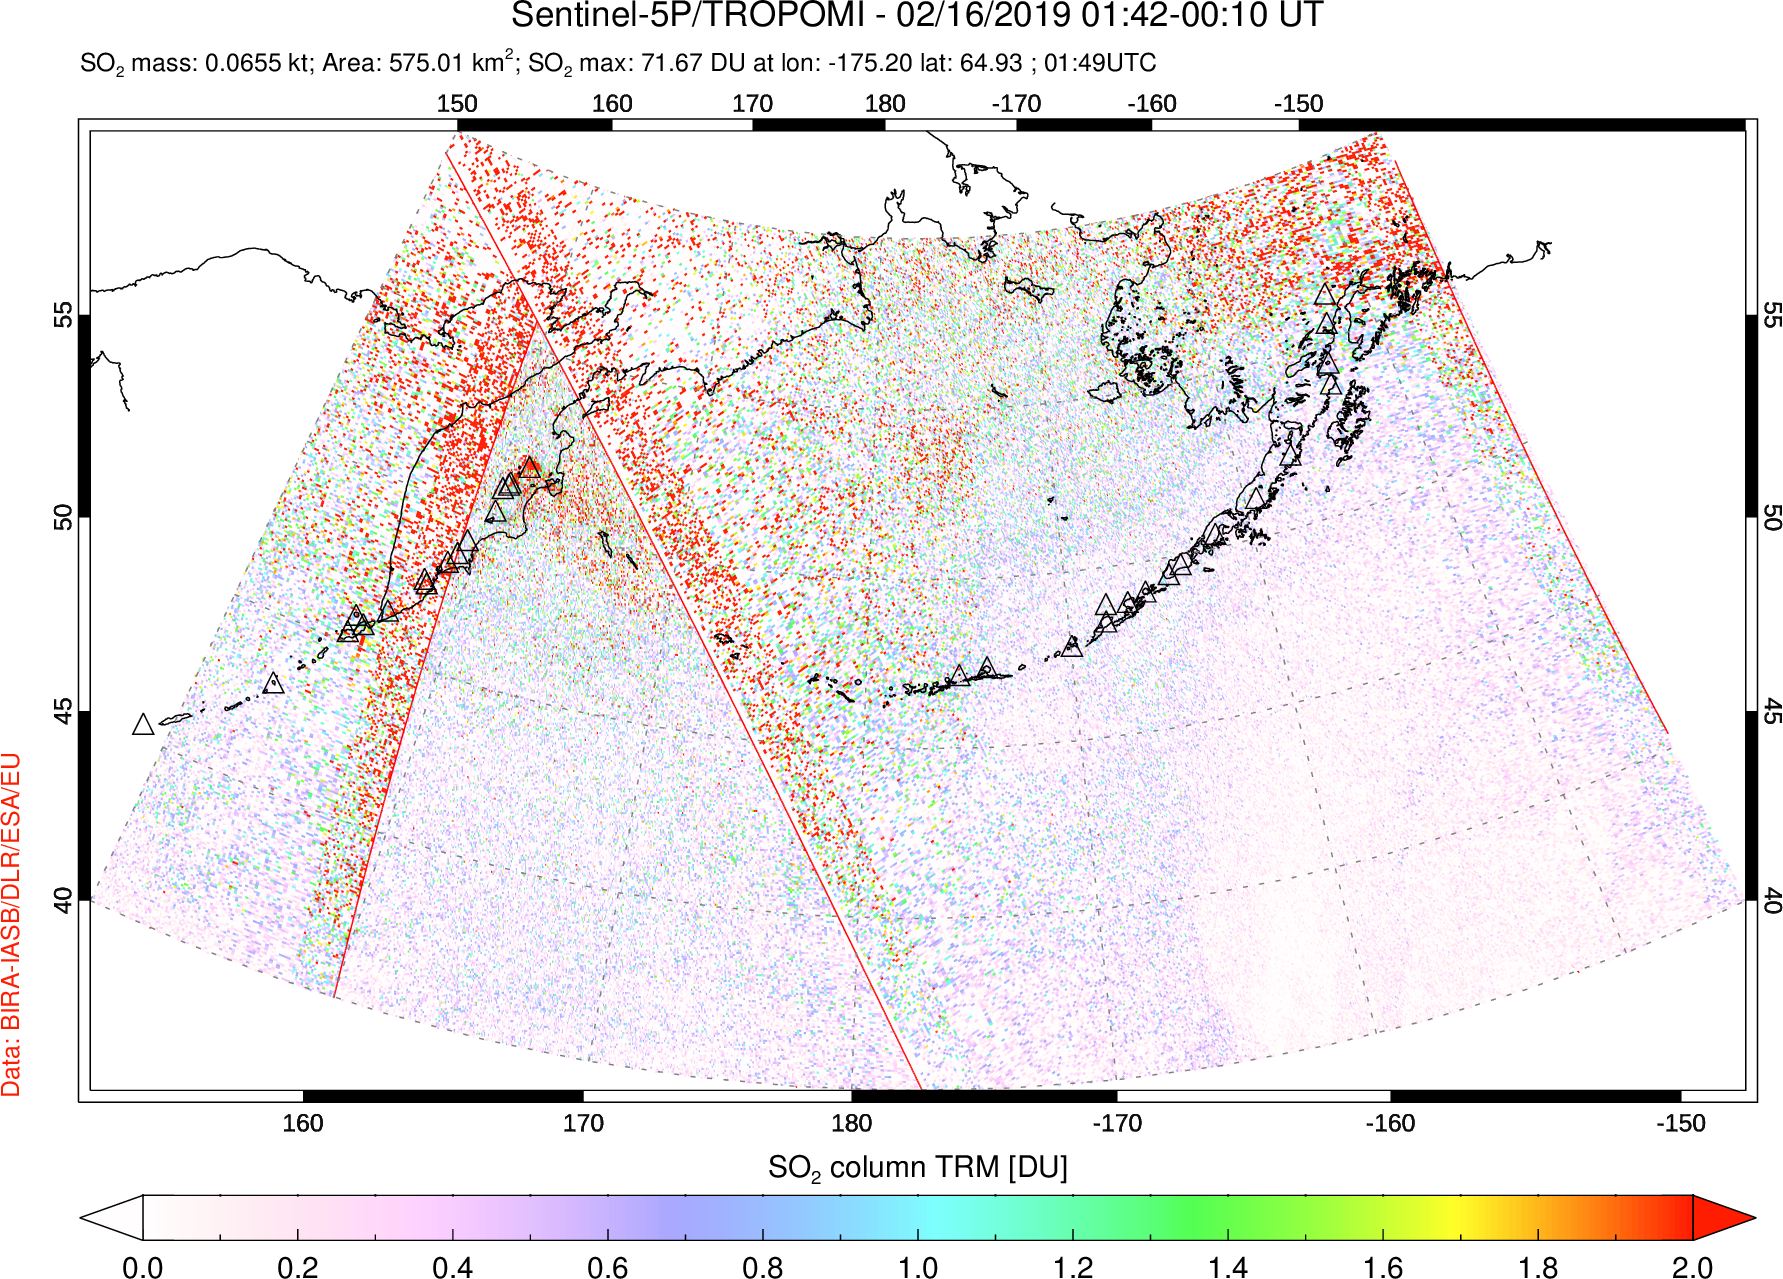 A sulfur dioxide image over North Pacific on Feb 16, 2019.